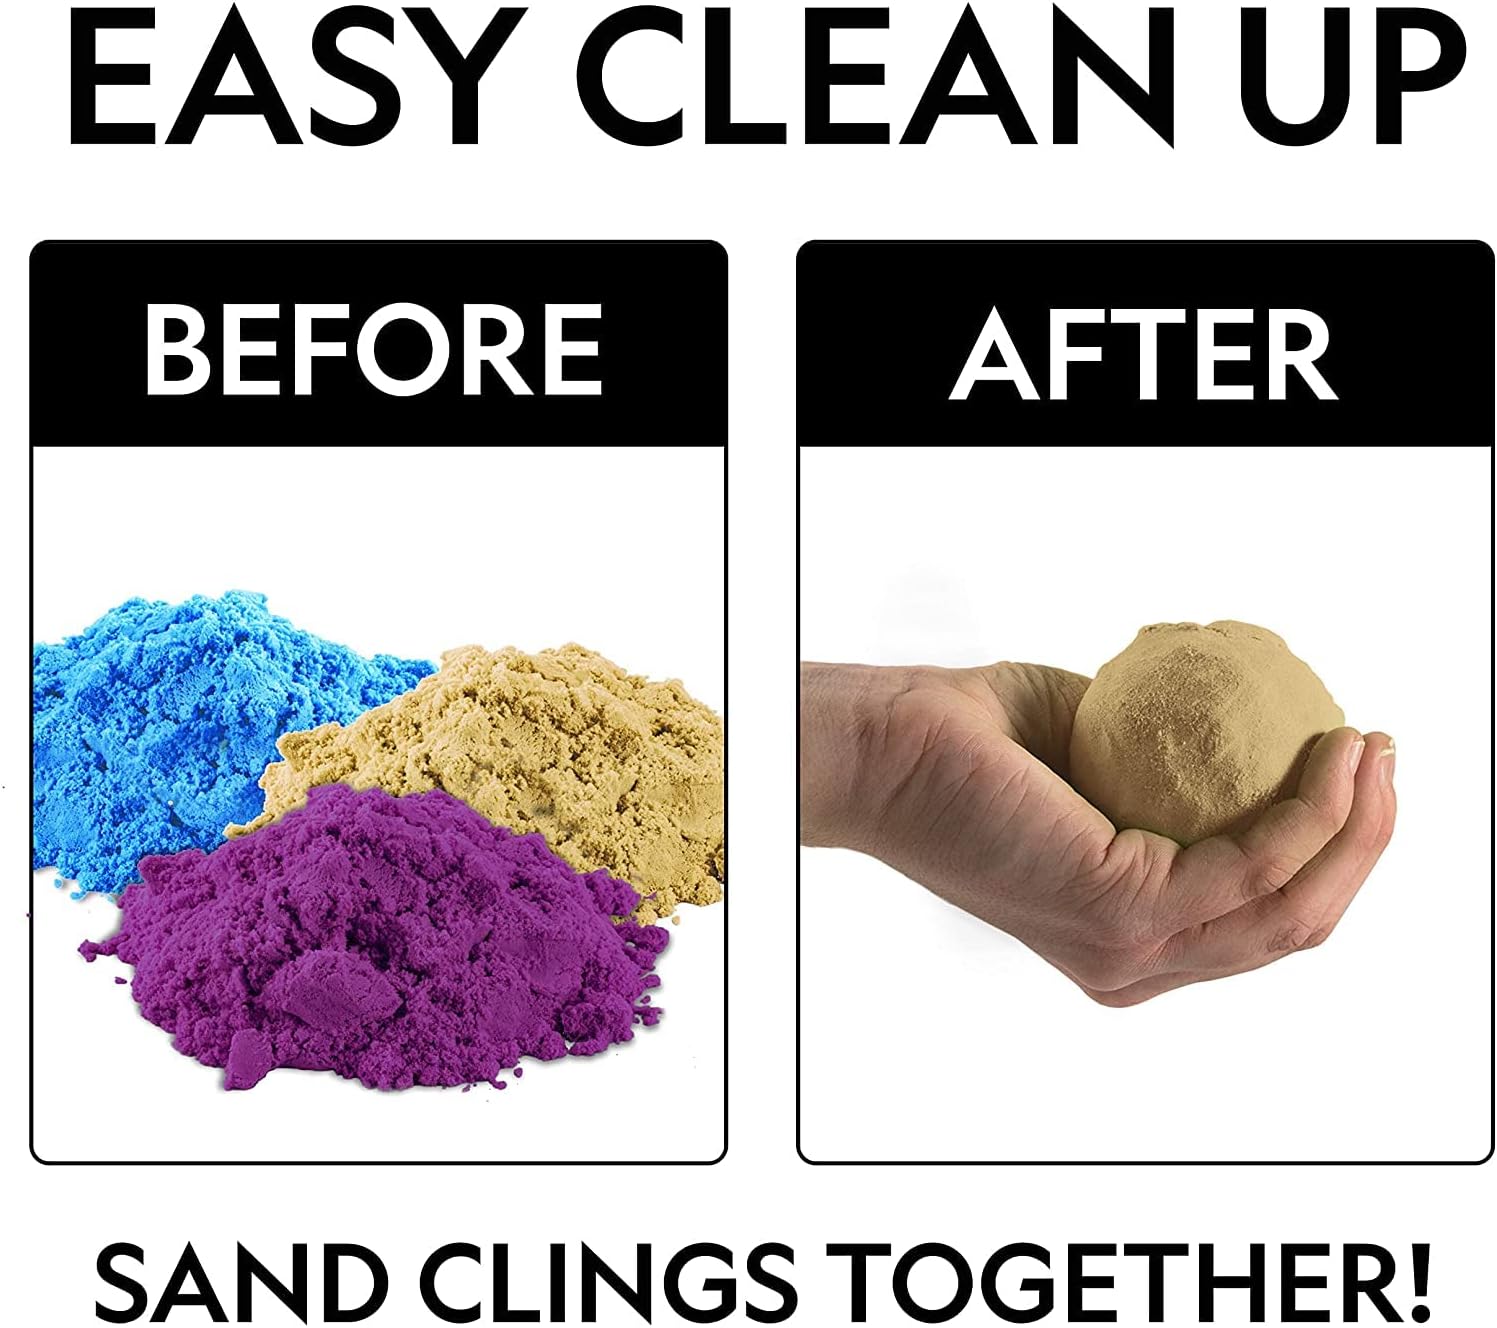 NATIONAL GEOGRAPHIC 6 Lb. Play Sand Combo Pack - 2 Lbs. Each of Blue, Purple and Natural Sand with Castle Molds - A Fun No Mess Sensory Activity, Kids Fake Sand Play Set (Amazon Exclusive)